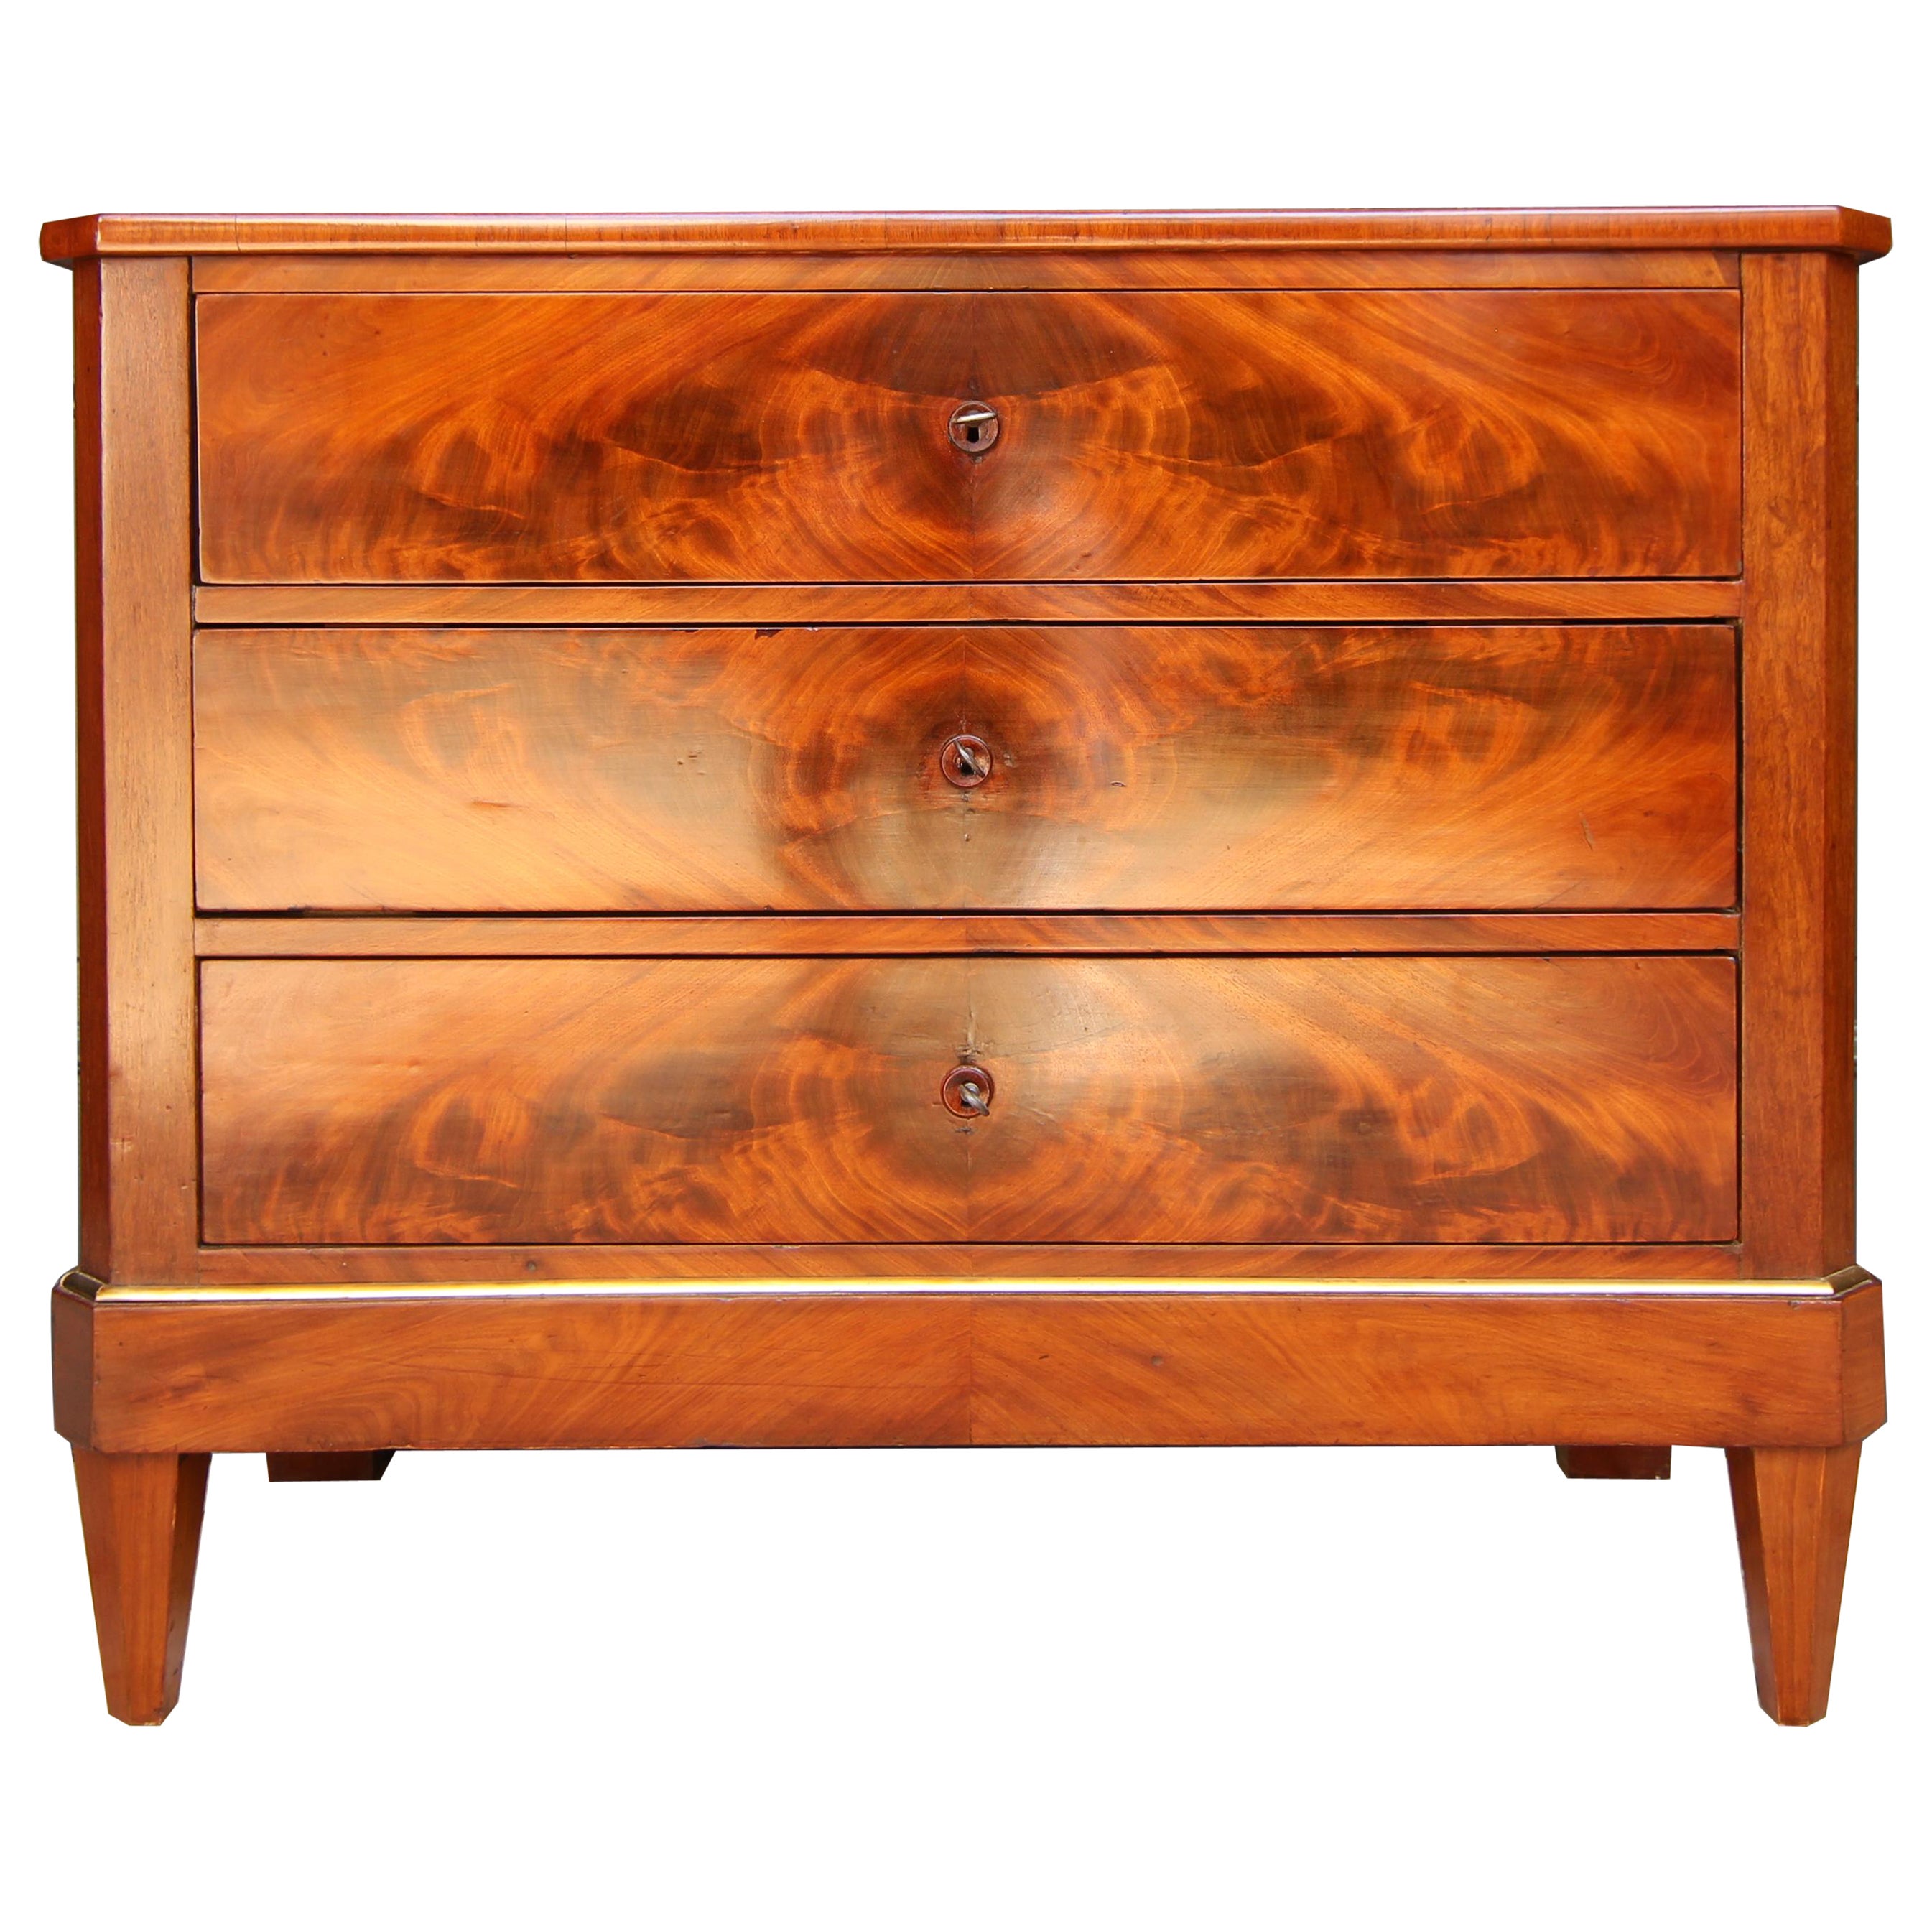 Early 20th Century Mahogany Directoire Style Chest of Drawers For Sale